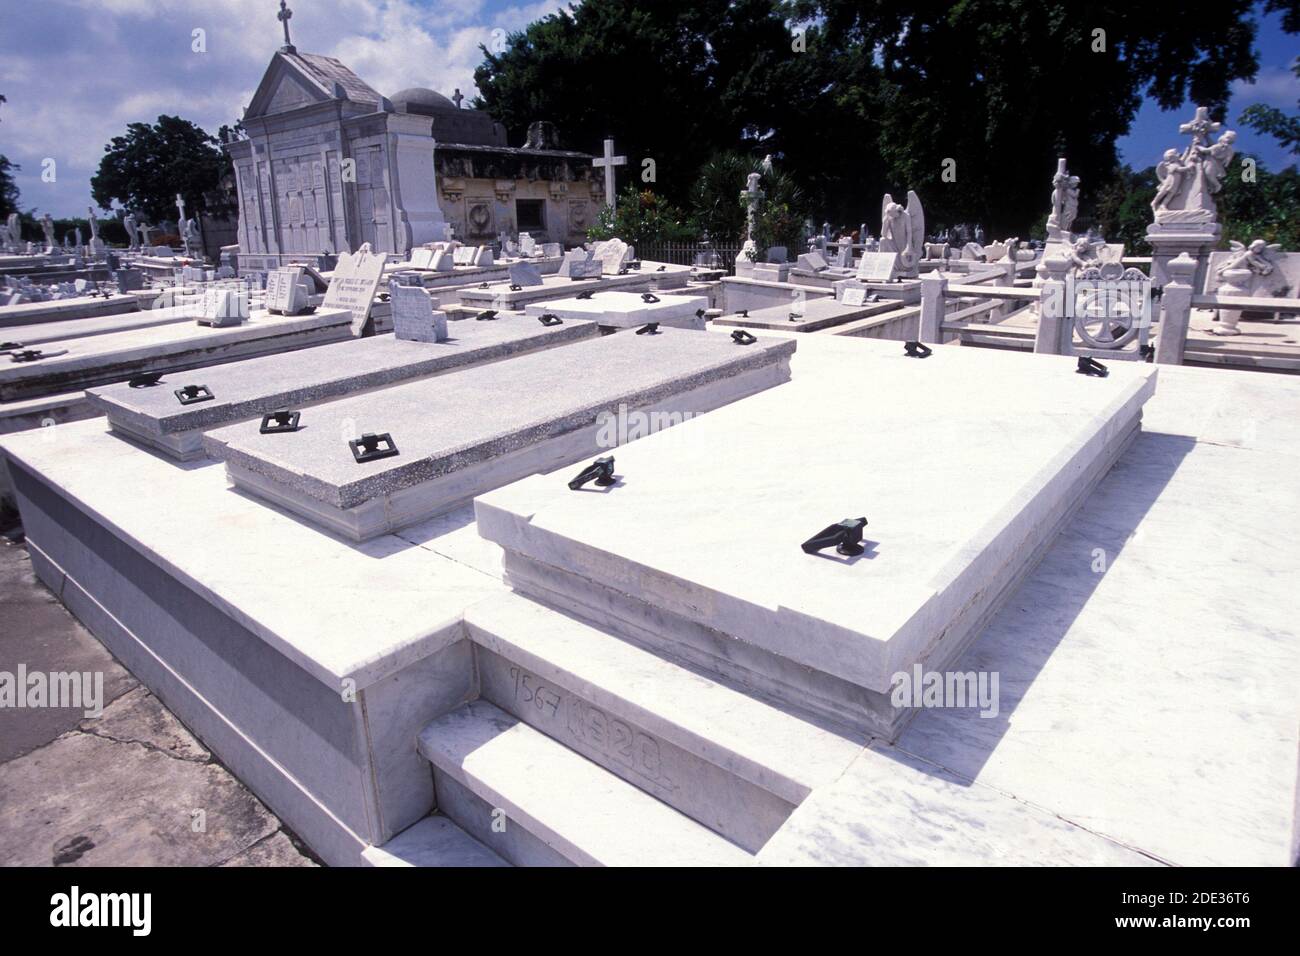 the grave of Ibrahim Ferrer of the Buena vista social club at the Cemetery of Necropolis Cristobal Colon  in the city of Havana on Cuba in the caribbe Stock Photo